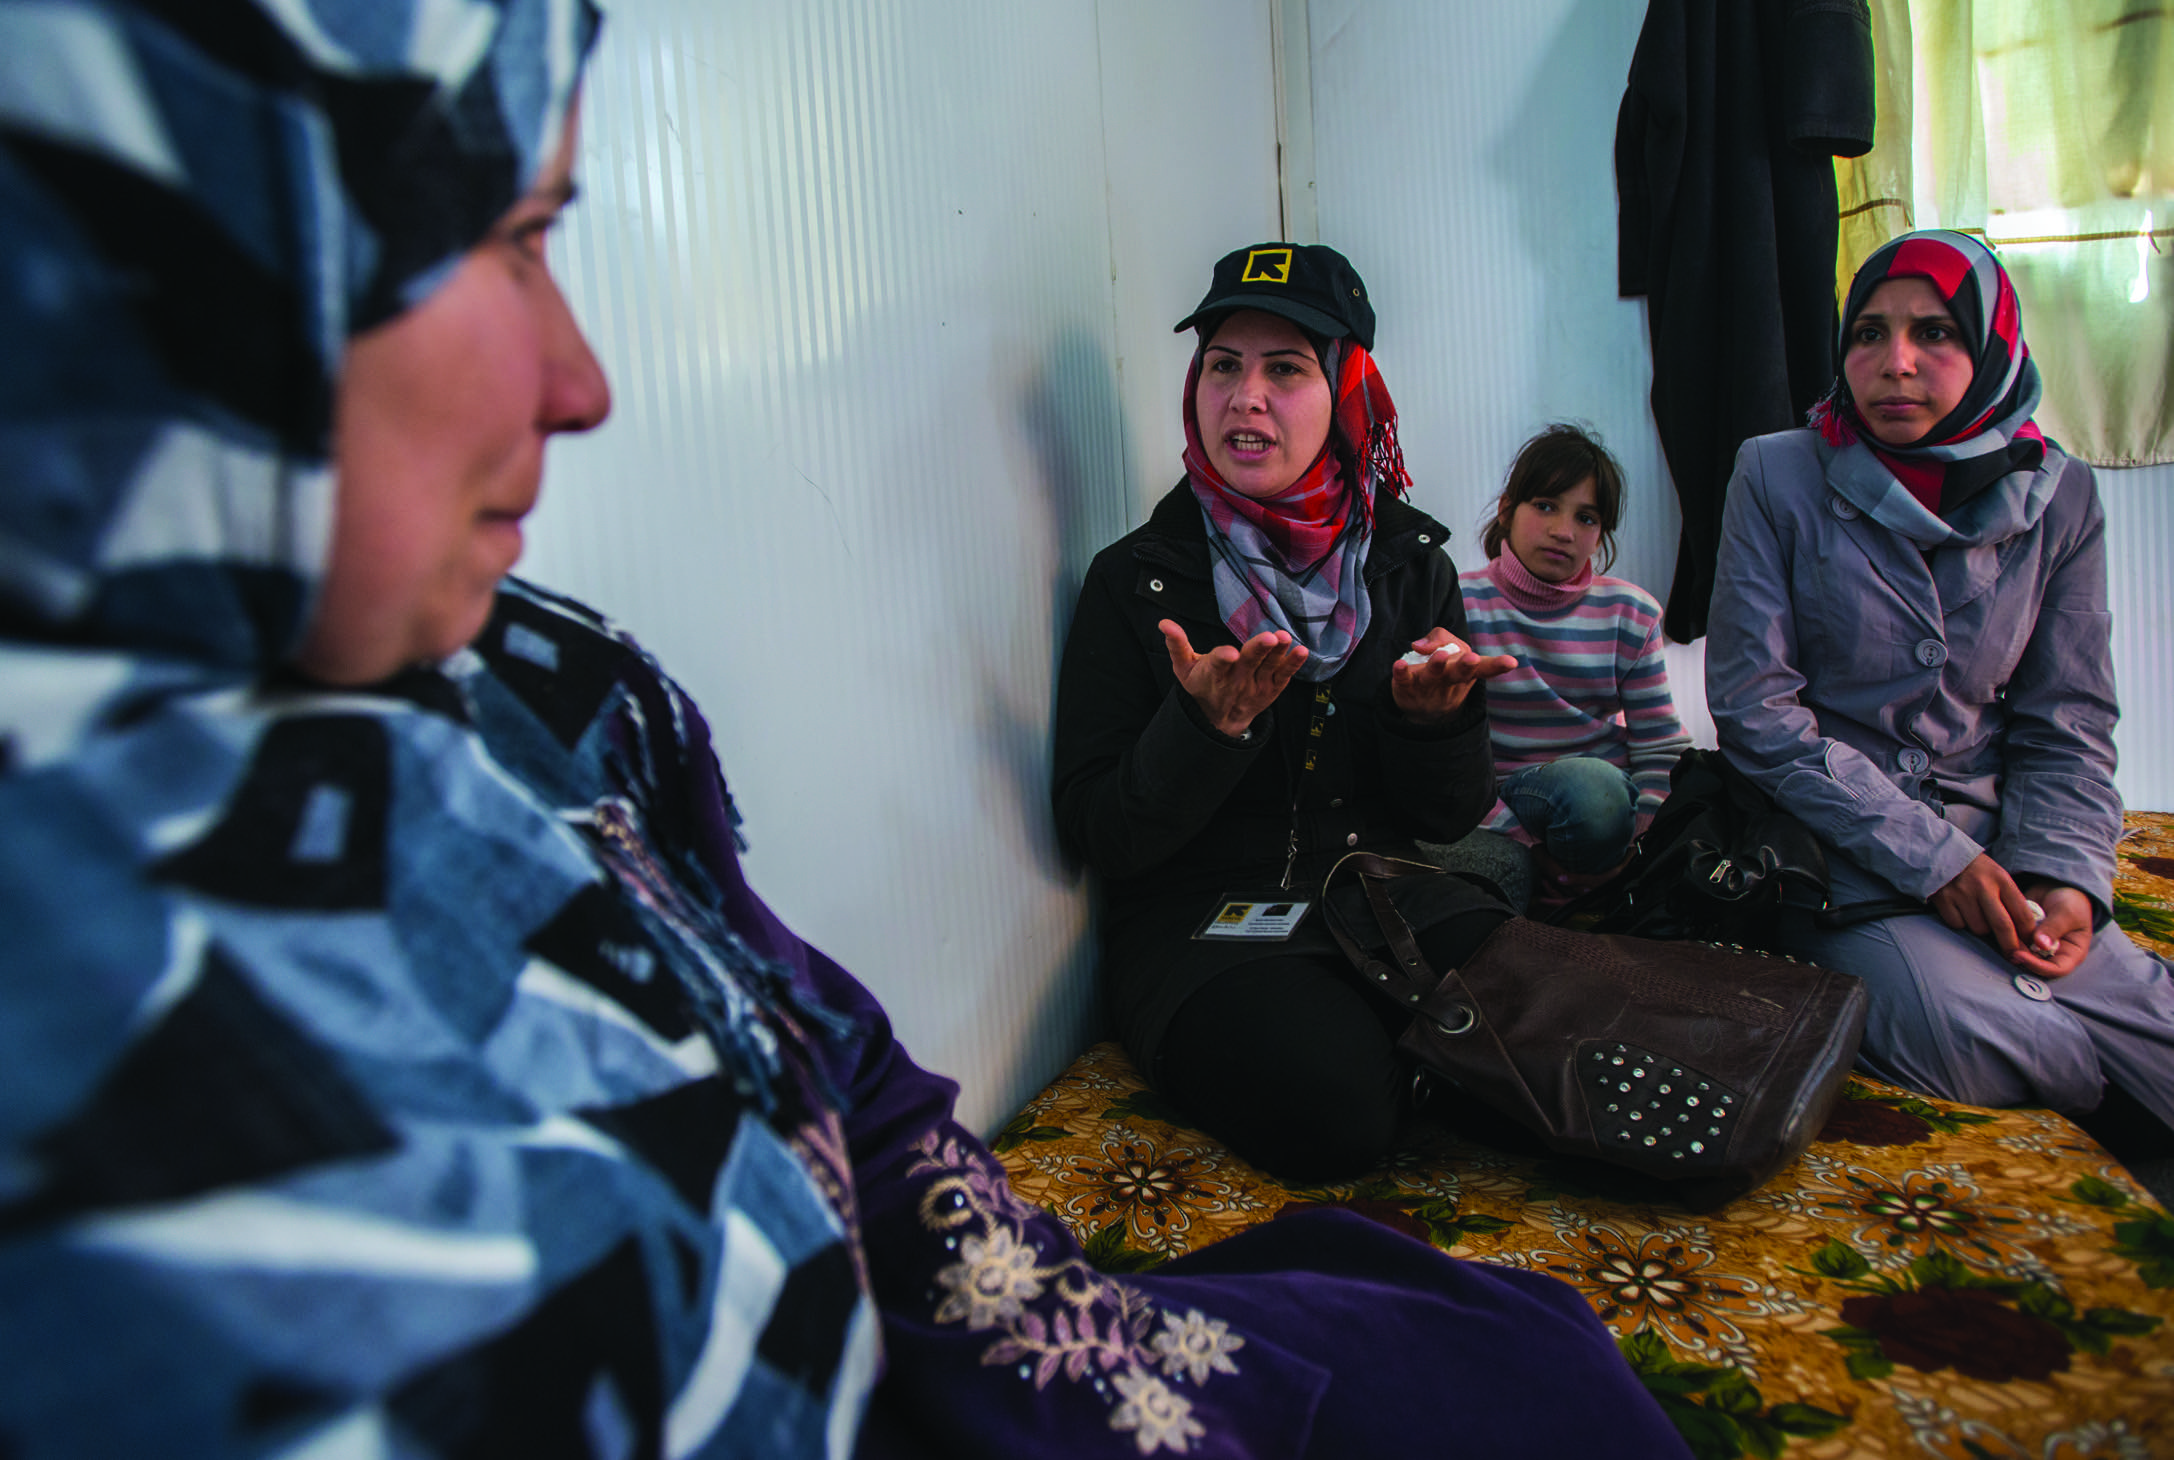 IRC volunteer Rania speaks with a Syrian refugee at a refugee camp in Jordan. Rania is a Syrian refugee who meets with as many as 50 families per week to inform them about available programming and support in the camp.